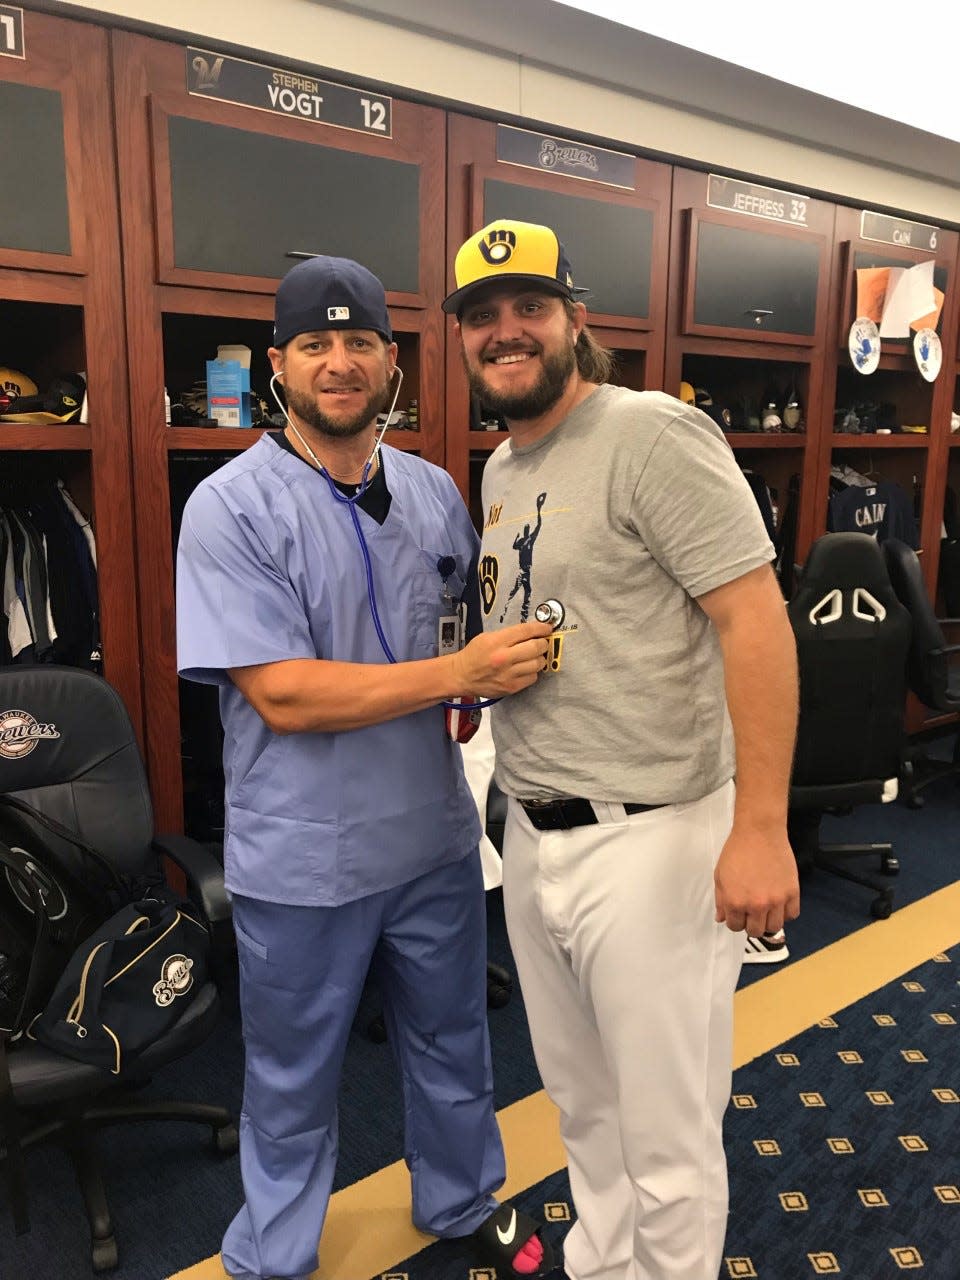 Stephen Vogt (left) and Wade Miley pose on Aug. 21, 2018, the day after Vogt performed the Heimlich Maneuver on Miley in the Brewers clubhouse. Miley bought Vogt the doctor's scrubs and stethoscope as a lighthearted thank-you.